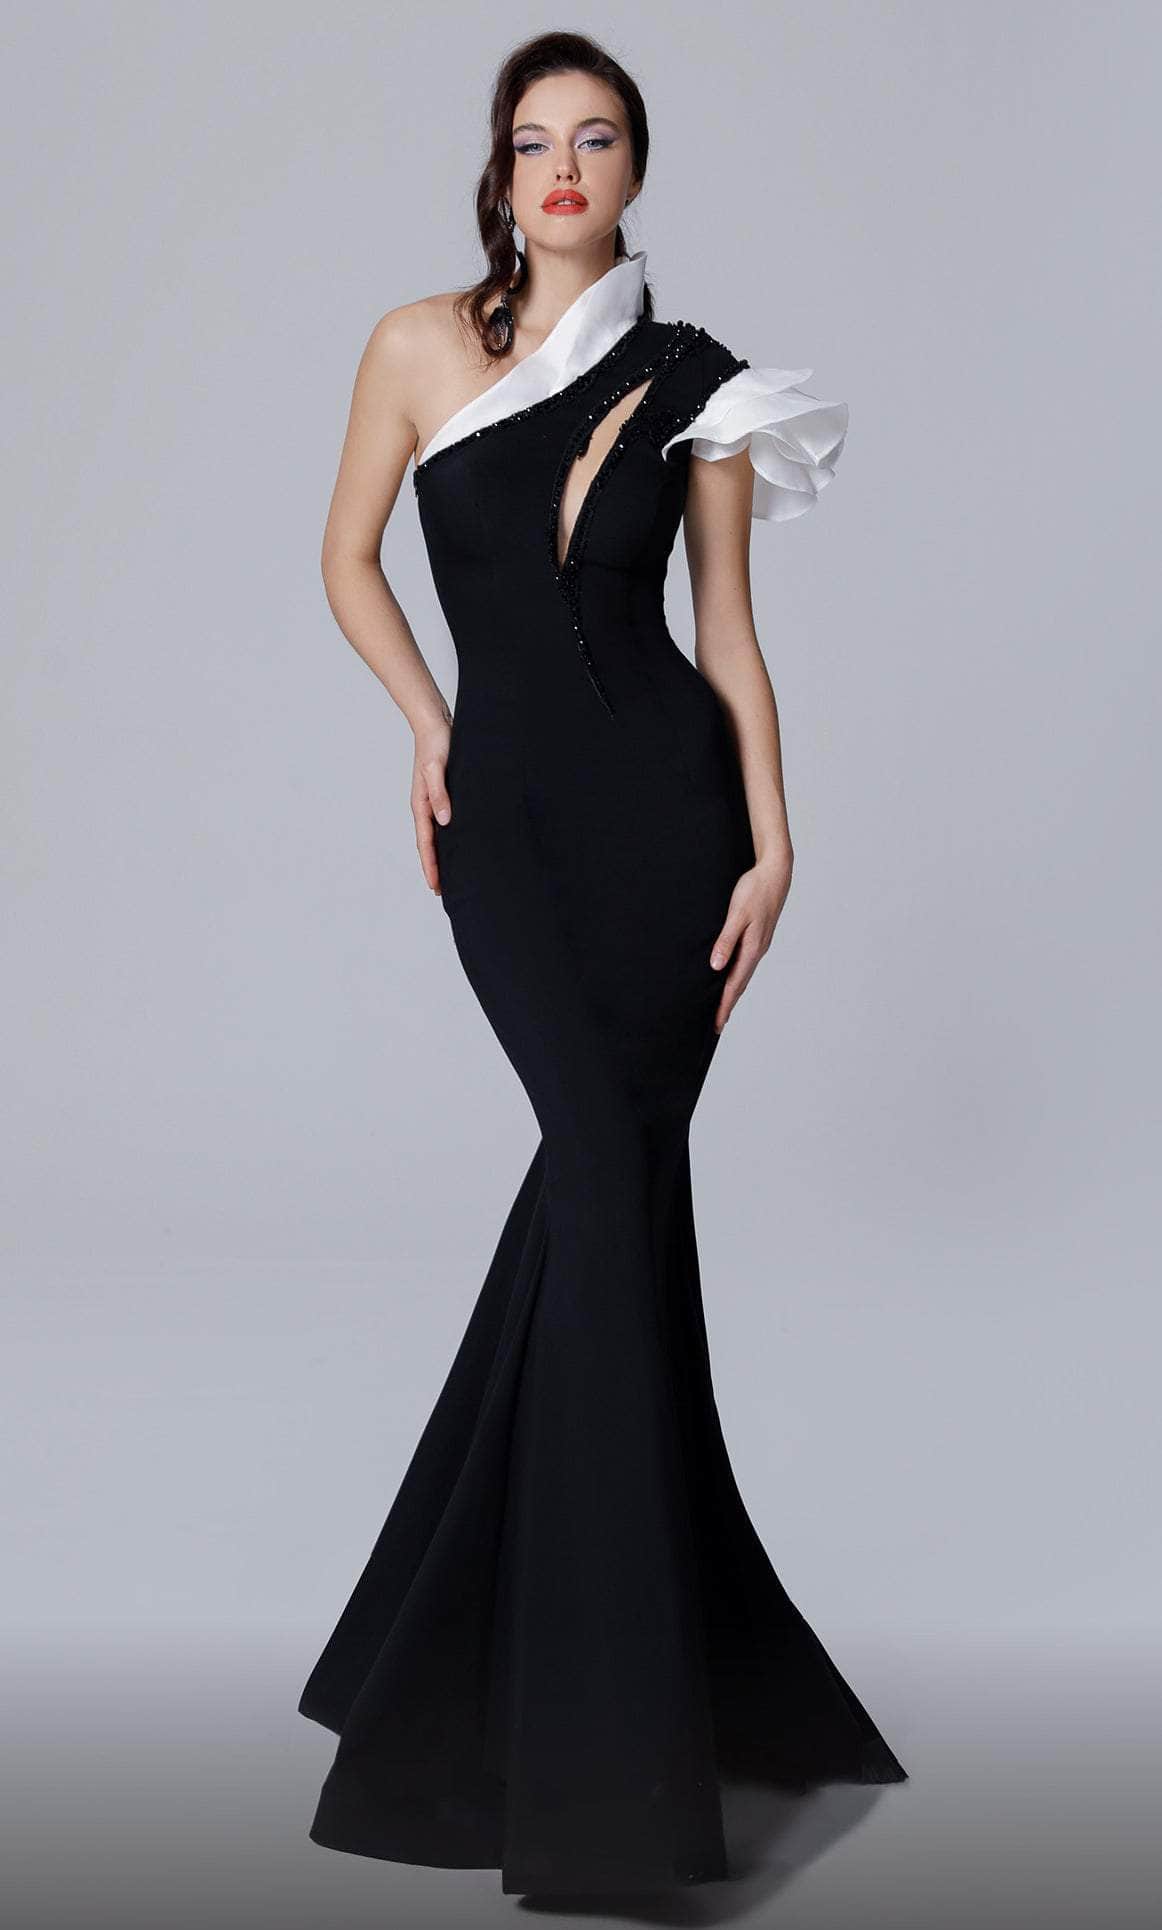 MNM Couture 2736 - Chiseled Mermaid Asymmetrical Dress
